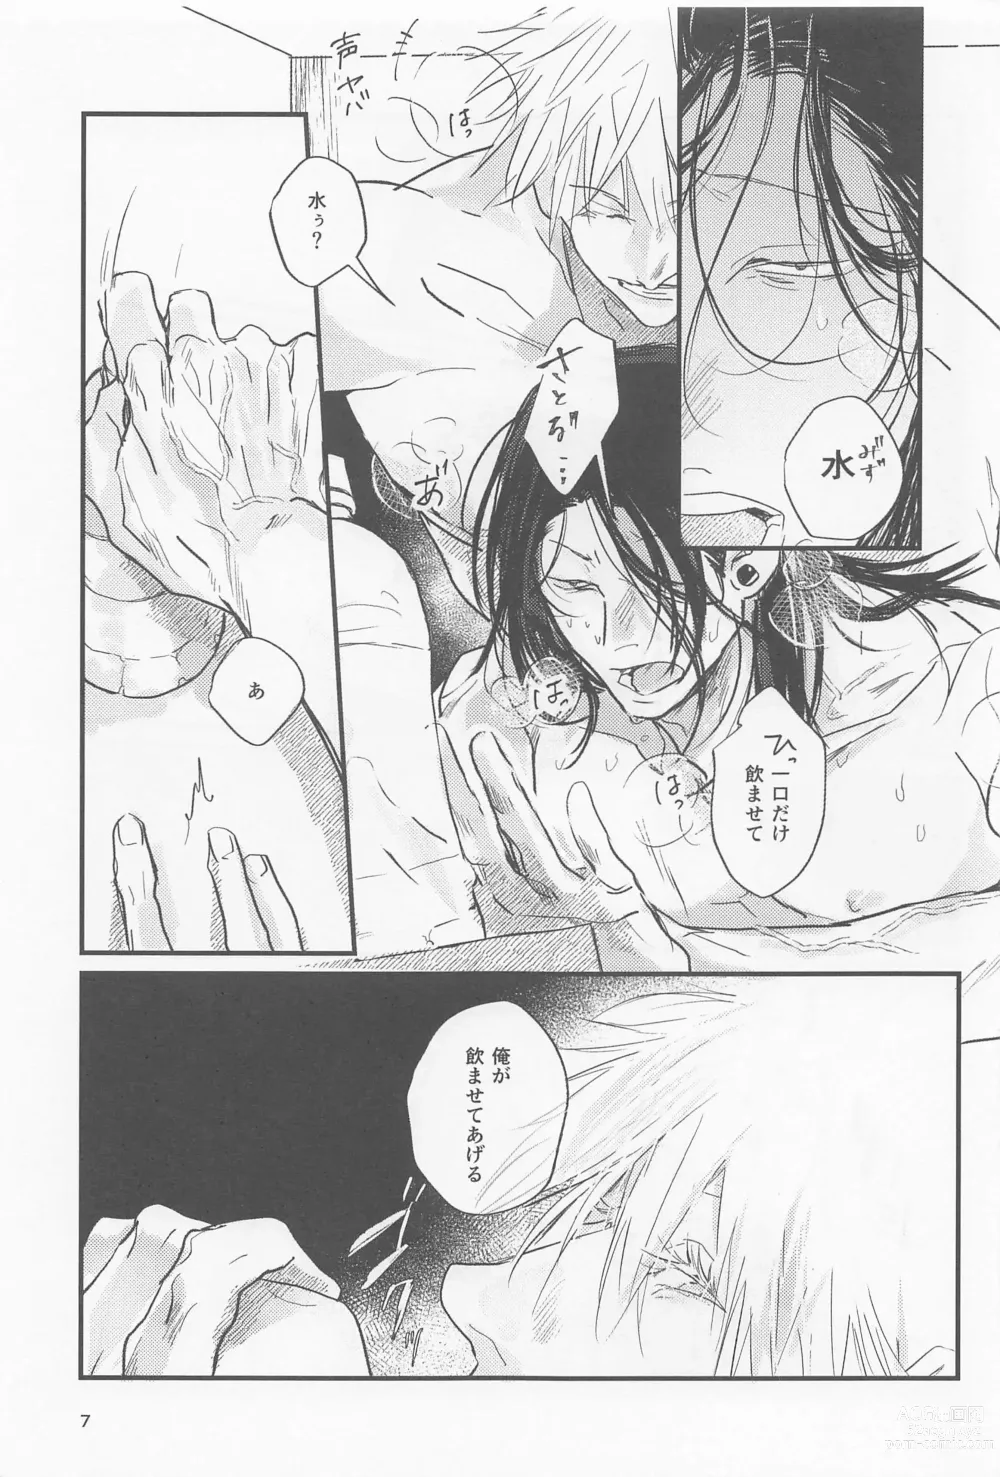 Page 6 of doujinshi PRIVATE